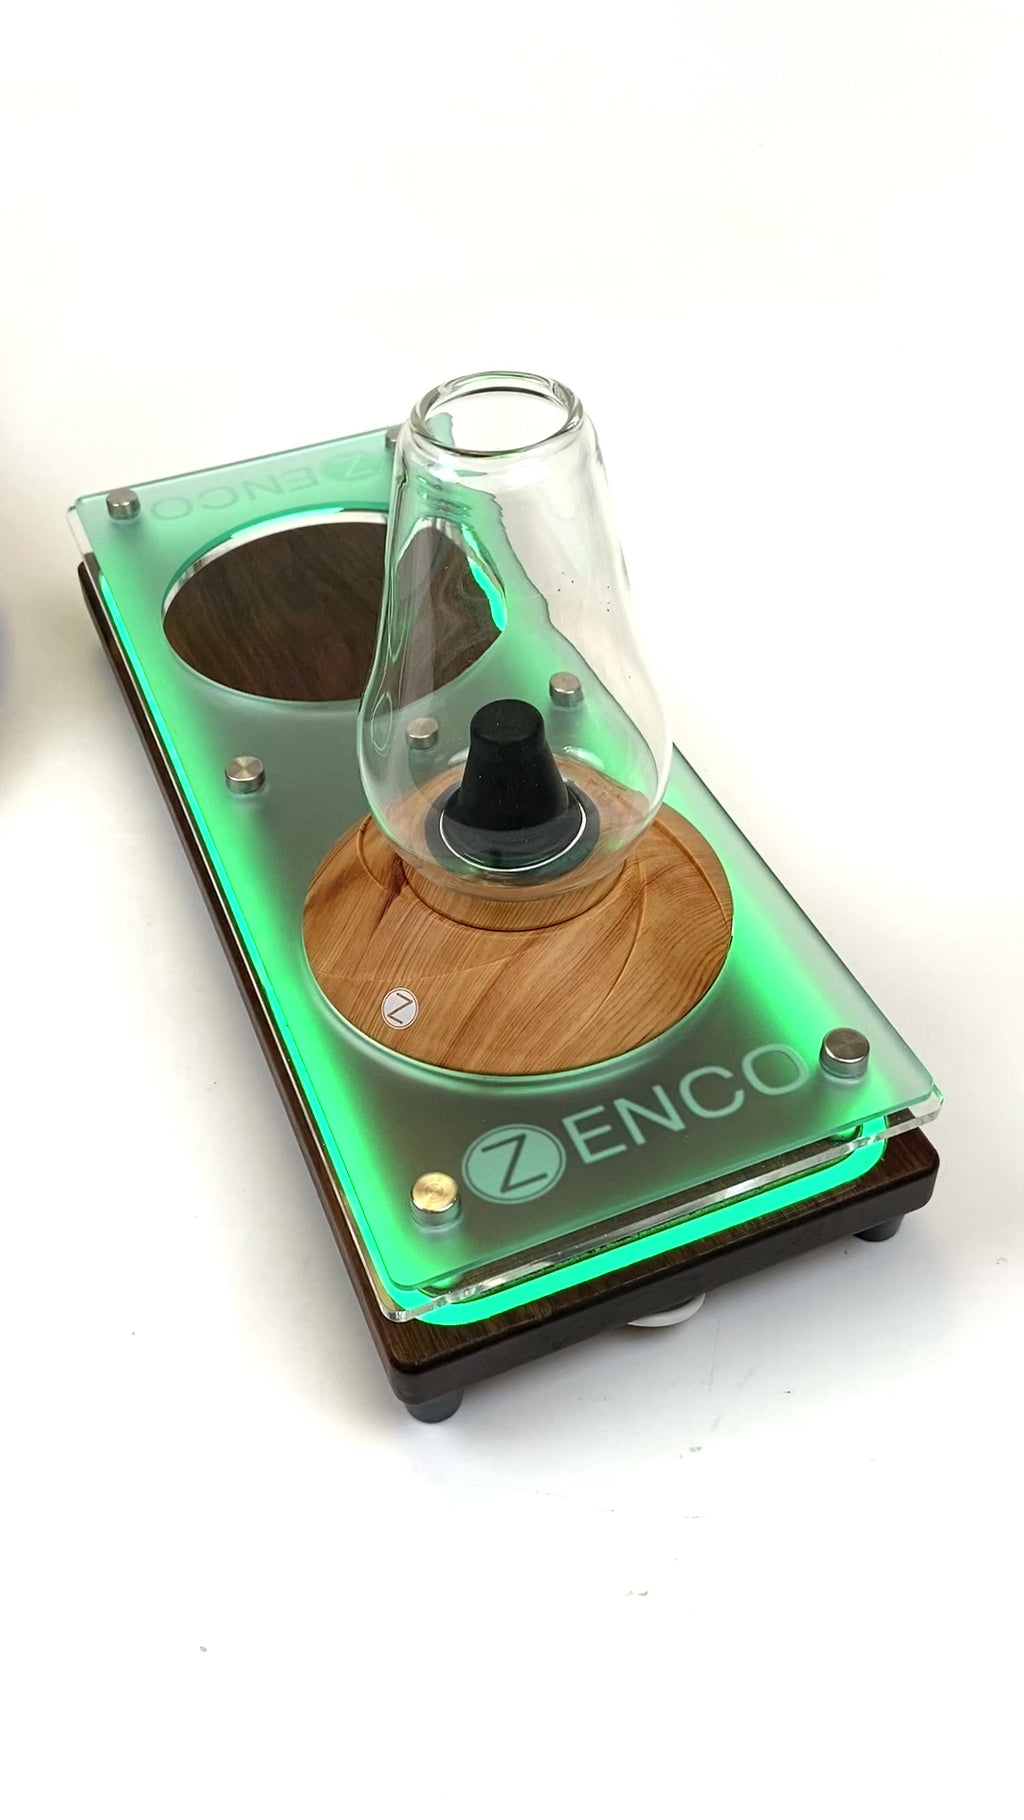 Zenco RGB light Tray for Sipping Vaporizer